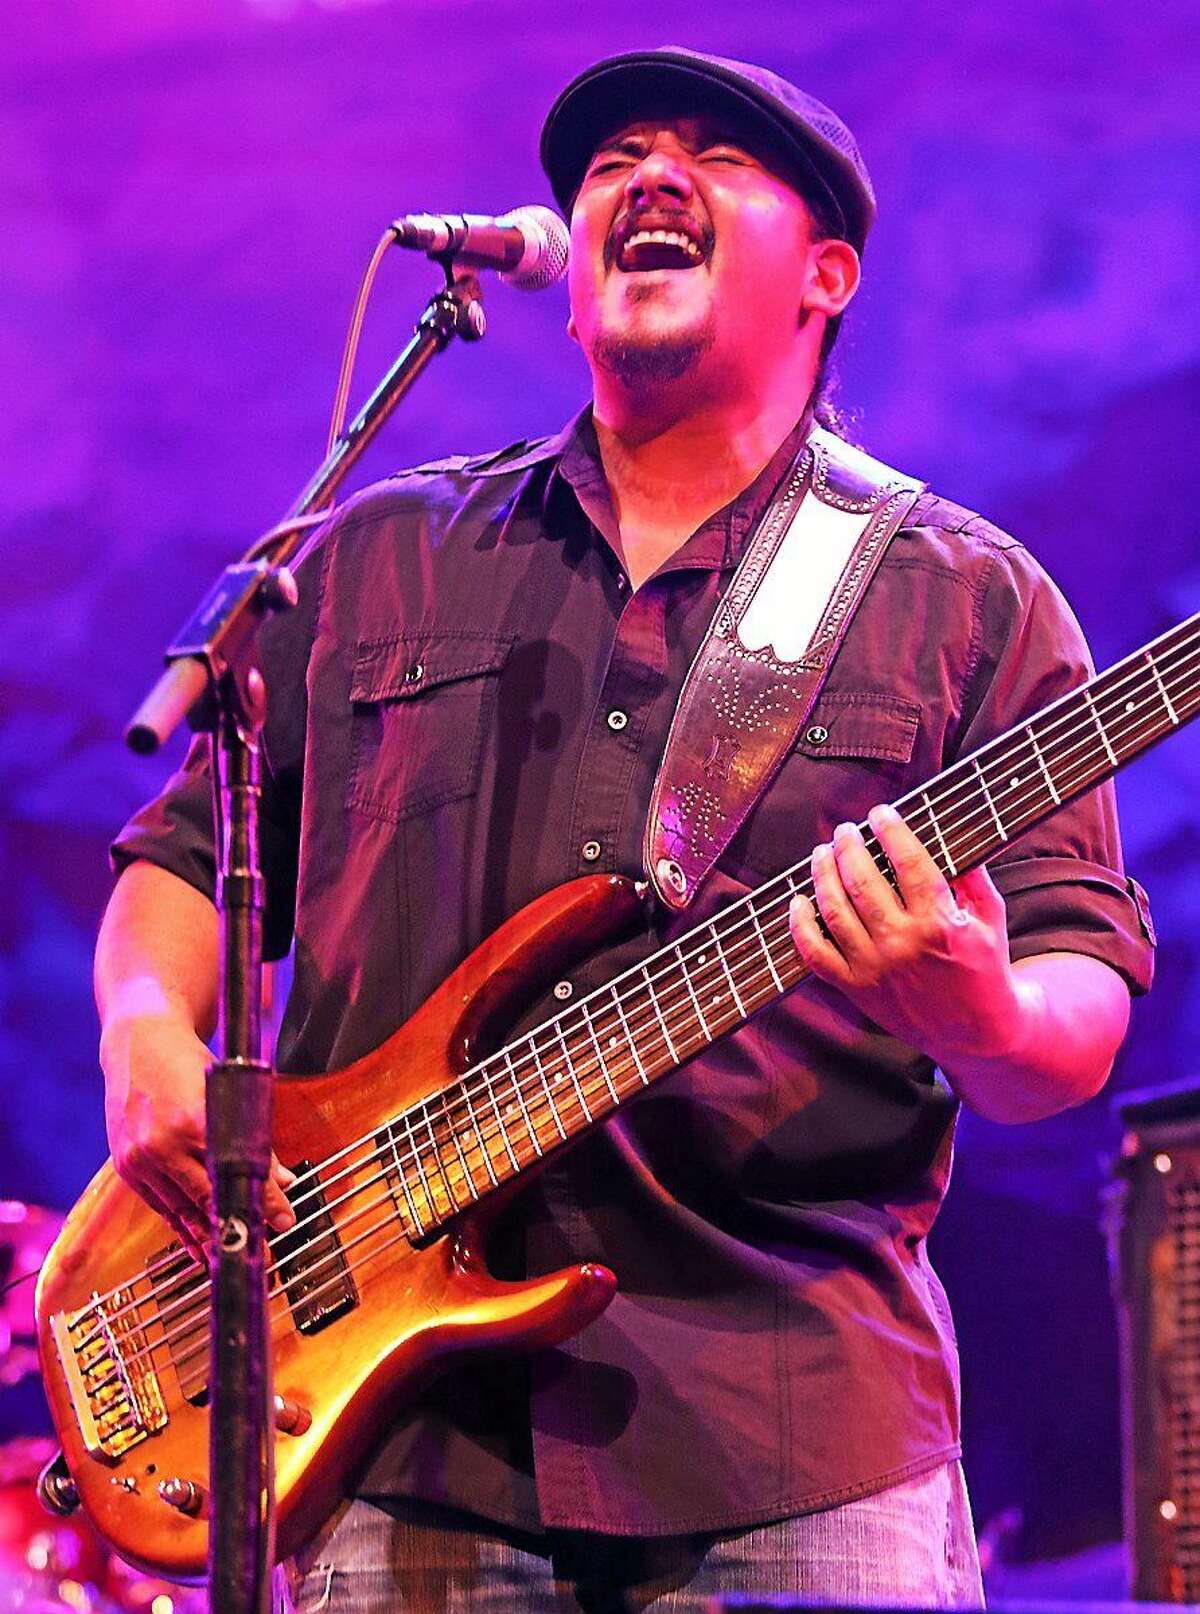 Photo by John Atashian Bassist Jojo Garza of the Los Lonely Boys is shown performing on stage at the Wolf Den Lounge in the Mohegan Sun Casino during the bands free show on Saturday, March 14. The band is currently on tour in support of their new CD, “ Revelation.”